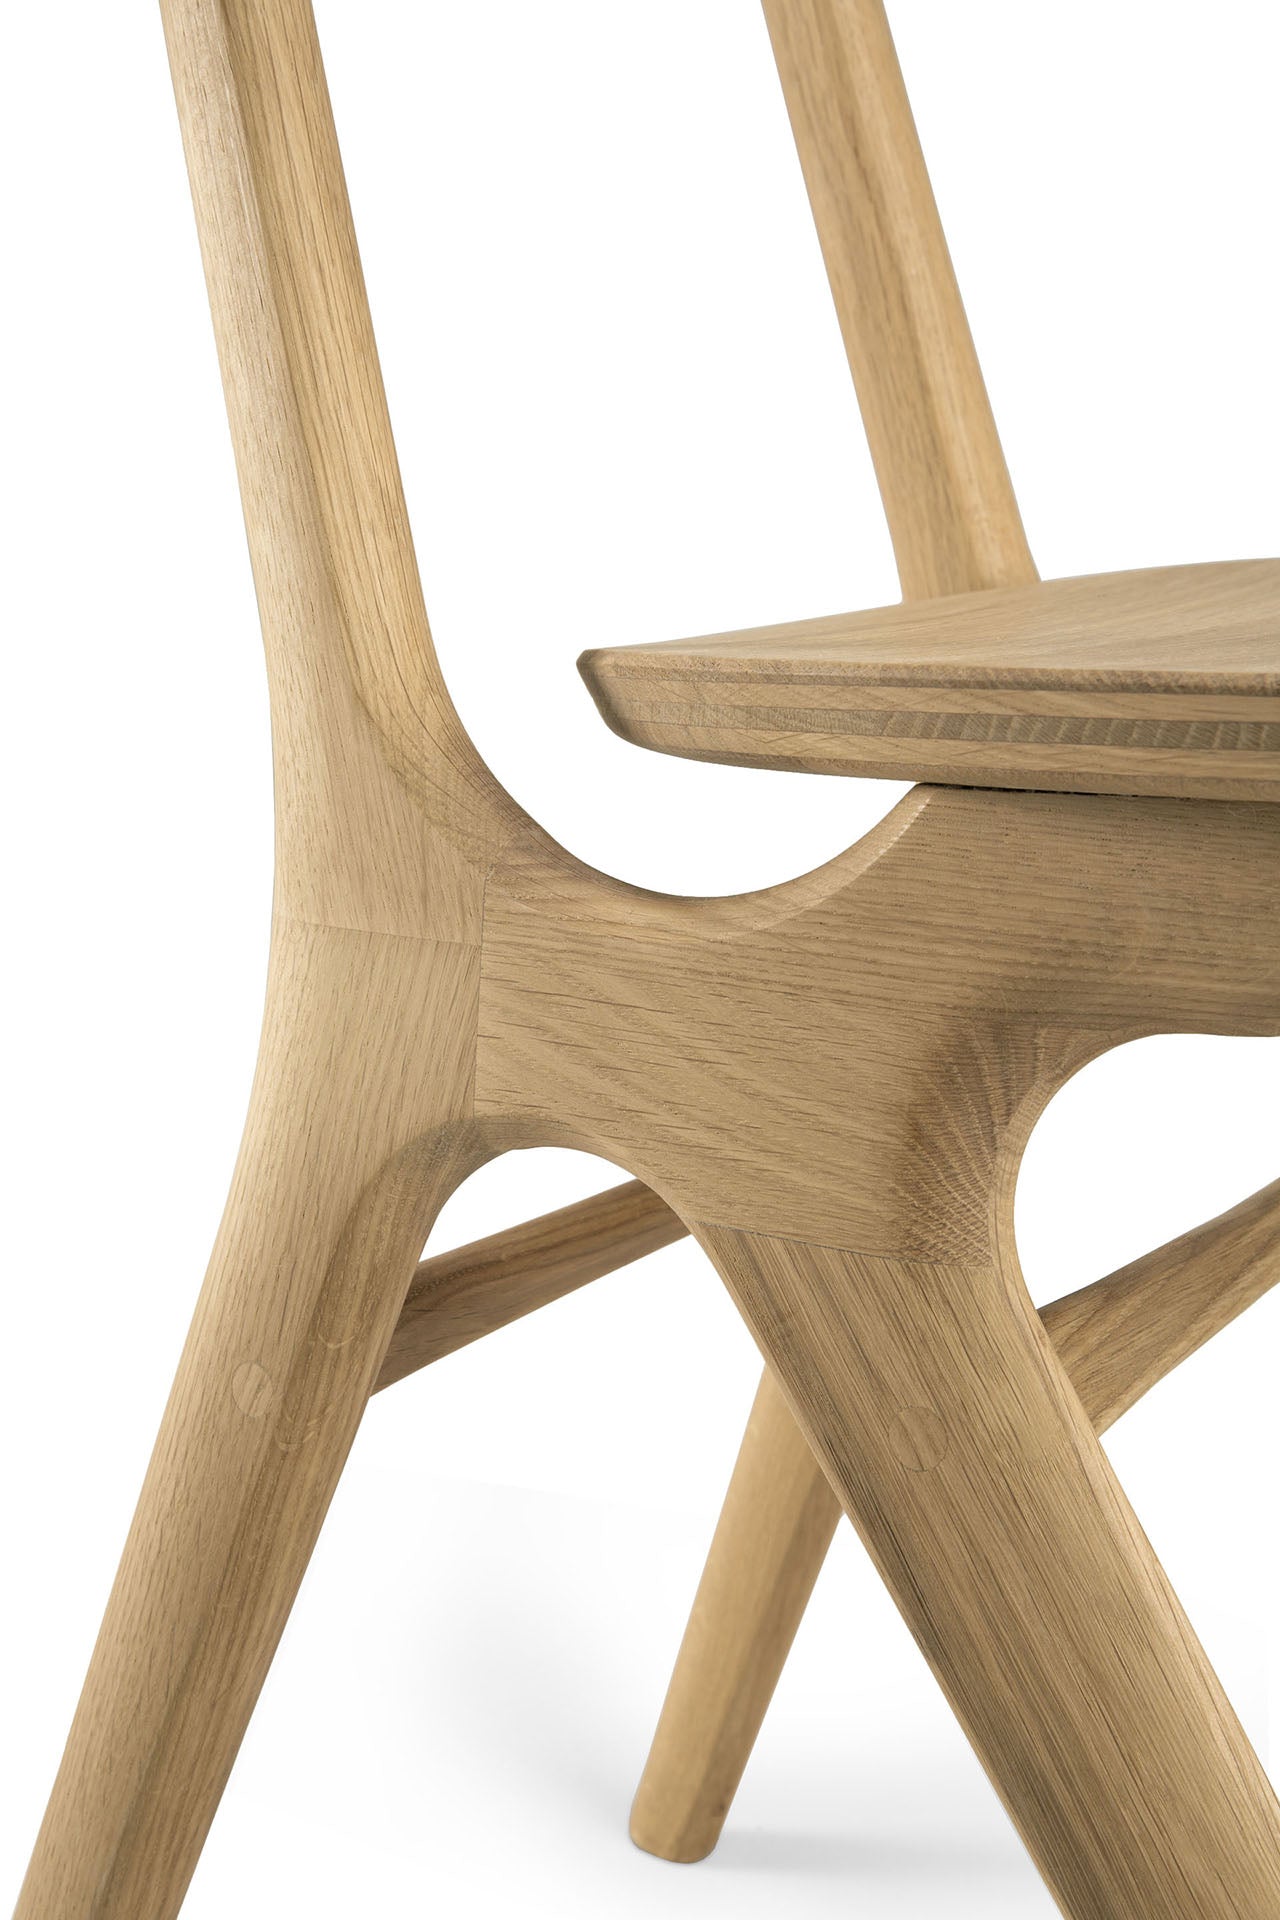 Ethnicraft Oak Eye Dining Chair is available from Make Your House A Home, Bendigo, Victoria, Australia